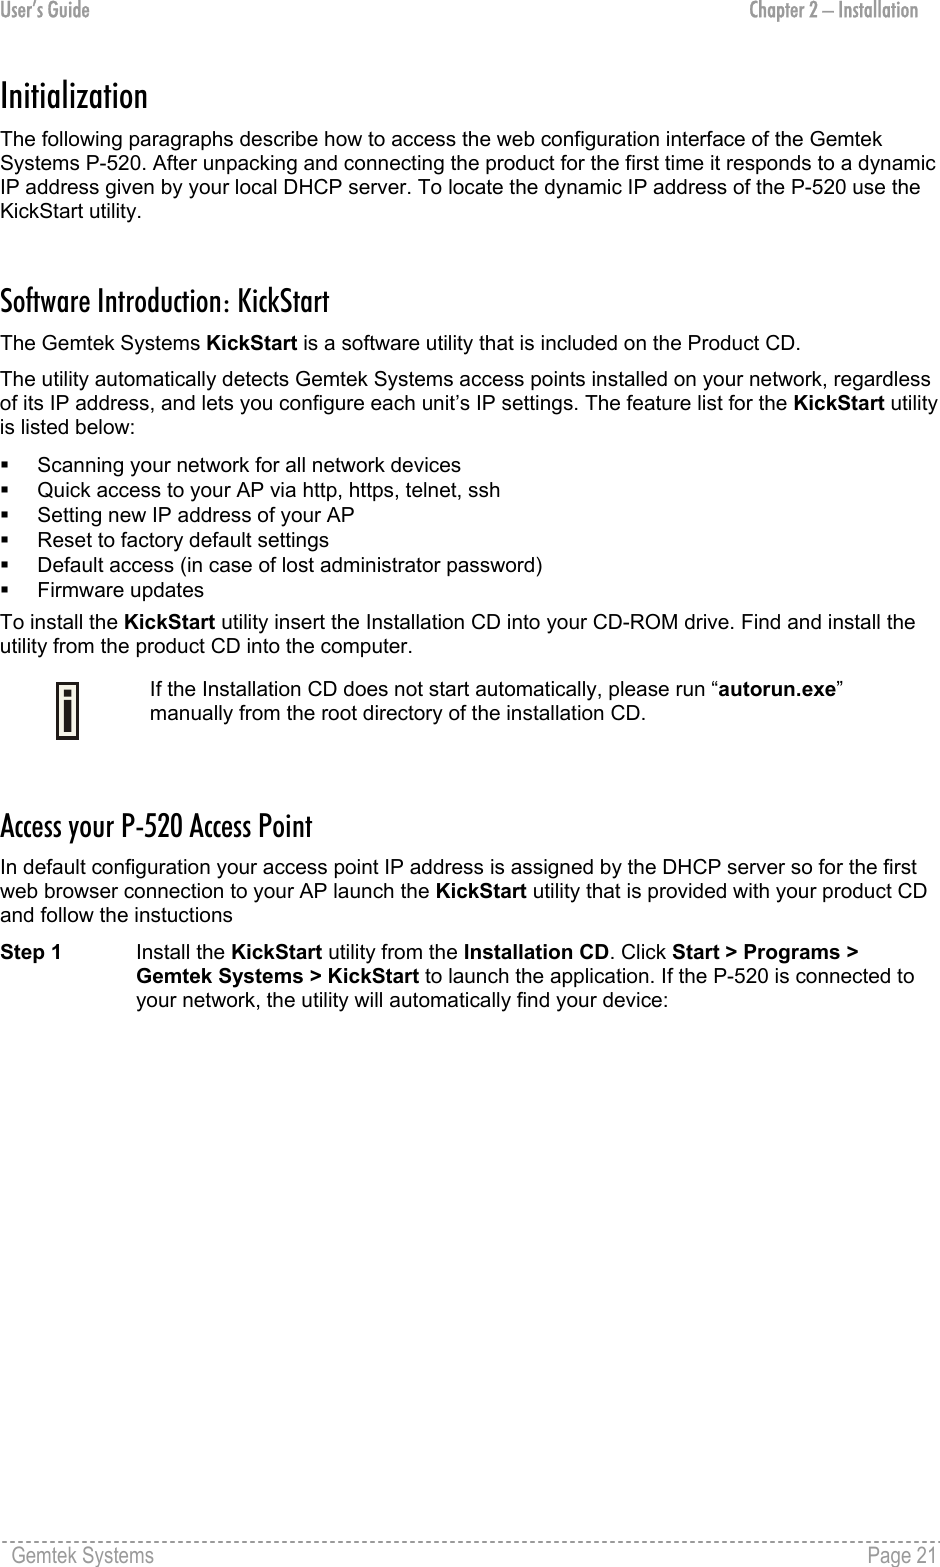 User’s Guide  Chapter 2 – Installation Initialization  The following paragraphs describe how to access the web configuration interface of the Gemtek Systems P-520. After unpacking and connecting the product for the first time it responds to a dynamic IP address given by your local DHCP server. To locate the dynamic IP address of the P-520 use the KickStart utility.  Software Introduction: KickStart The Gemtek Systems KickStart is a software utility that is included on the Product CD.  The utility automatically detects Gemtek Systems access points installed on your network, regardless of its IP address, and lets you configure each unit’s IP settings. The feature list for the KickStart utility is listed below:   Scanning your network for all network devices   Quick access to your AP via http, https, telnet, ssh   Setting new IP address of your AP   Reset to factory default settings   Default access (in case of lost administrator password)   Firmware updates To install the KickStart utility insert the Installation CD into your CD-ROM drive. Find and install the utility from the product CD into the computer.  If the Installation CD does not start automatically, please run “autorun.exe” manually from the root directory of the installation CD.  Access your P-520 Access Point In default configuration your access point IP address is assigned by the DHCP server so for the first web browser connection to your AP launch the KickStart utility that is provided with your product CD and follow the instuctions Step 1 Install the KickStart utility from the Installation CD. Click Start &gt; Programs &gt; Gemtek Systems &gt; KickStart to launch the application. If the P-520 is connected to your network, the utility will automatically find your device: Gemtek Systems    Page 21  